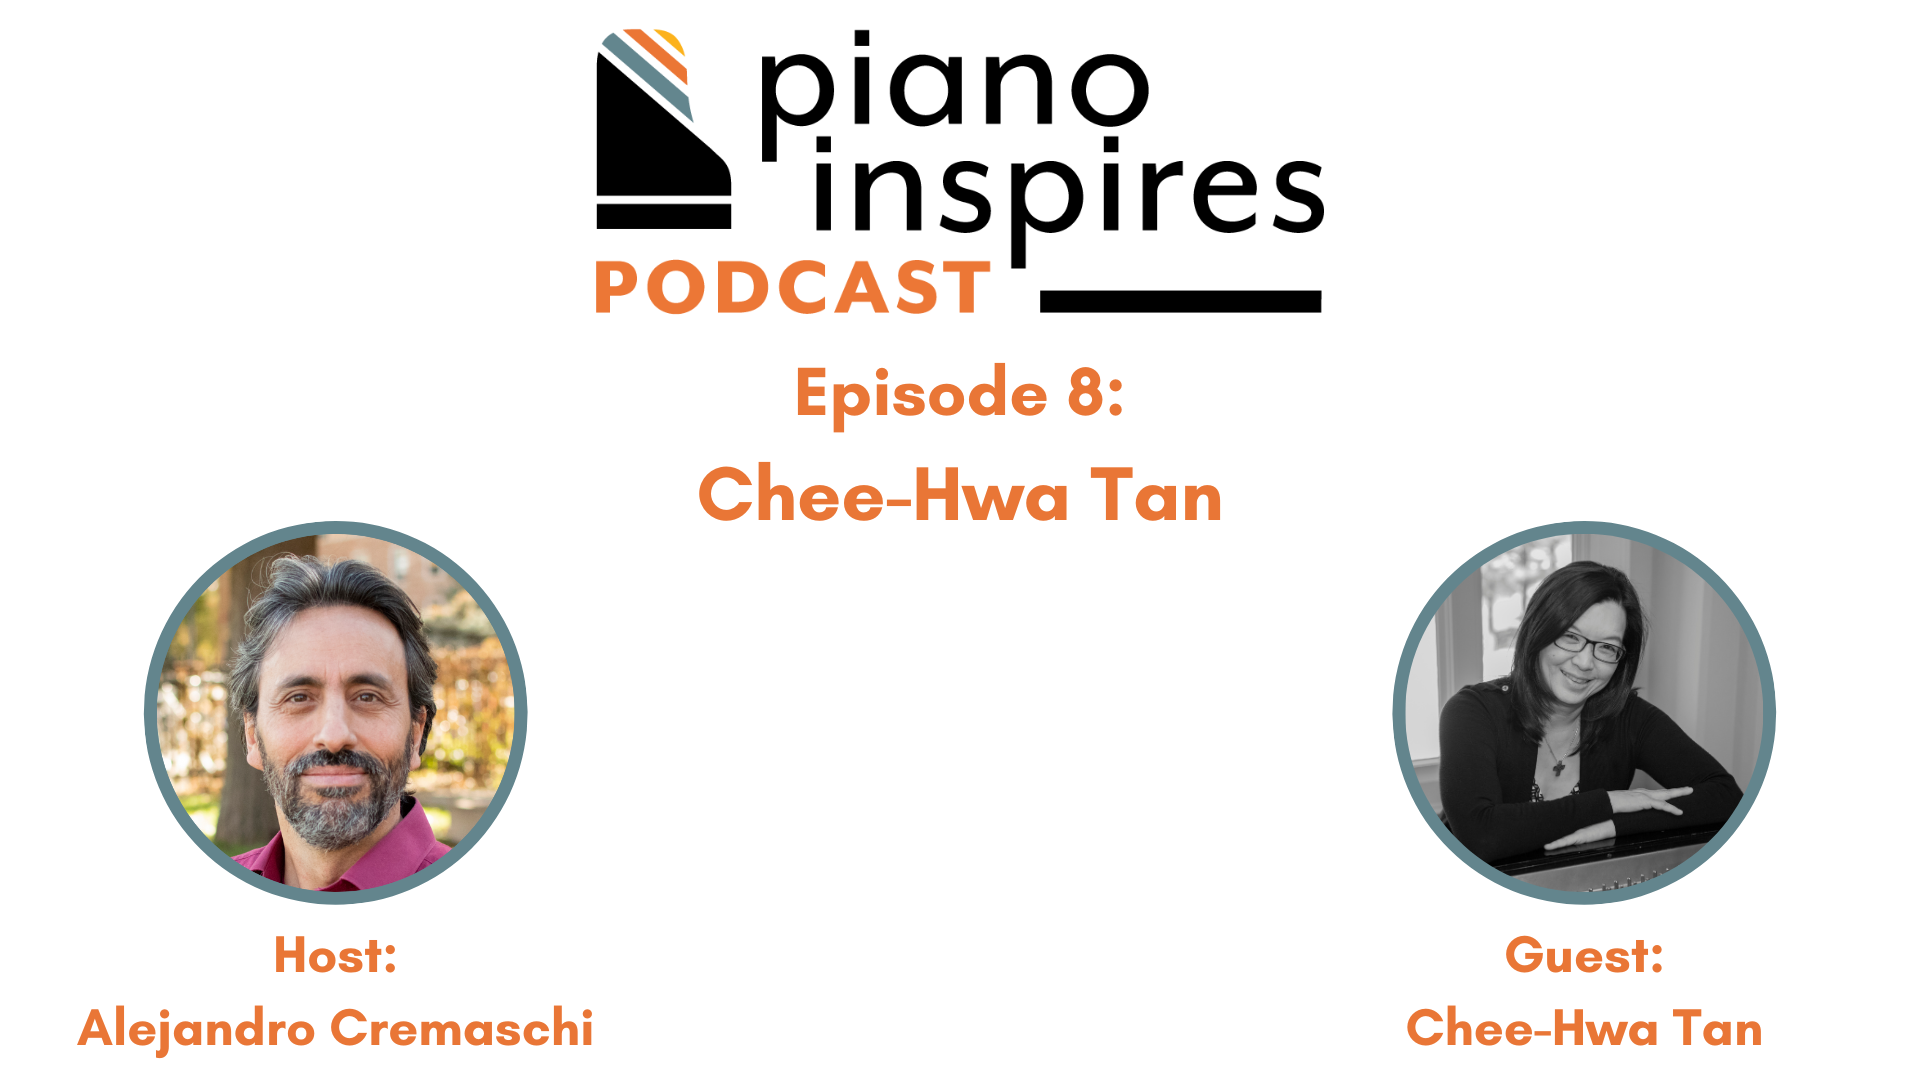 Episode 8: Chee-Hwa Tan, Composer, Pianist, and Teacher with Alejandro Cremaschi